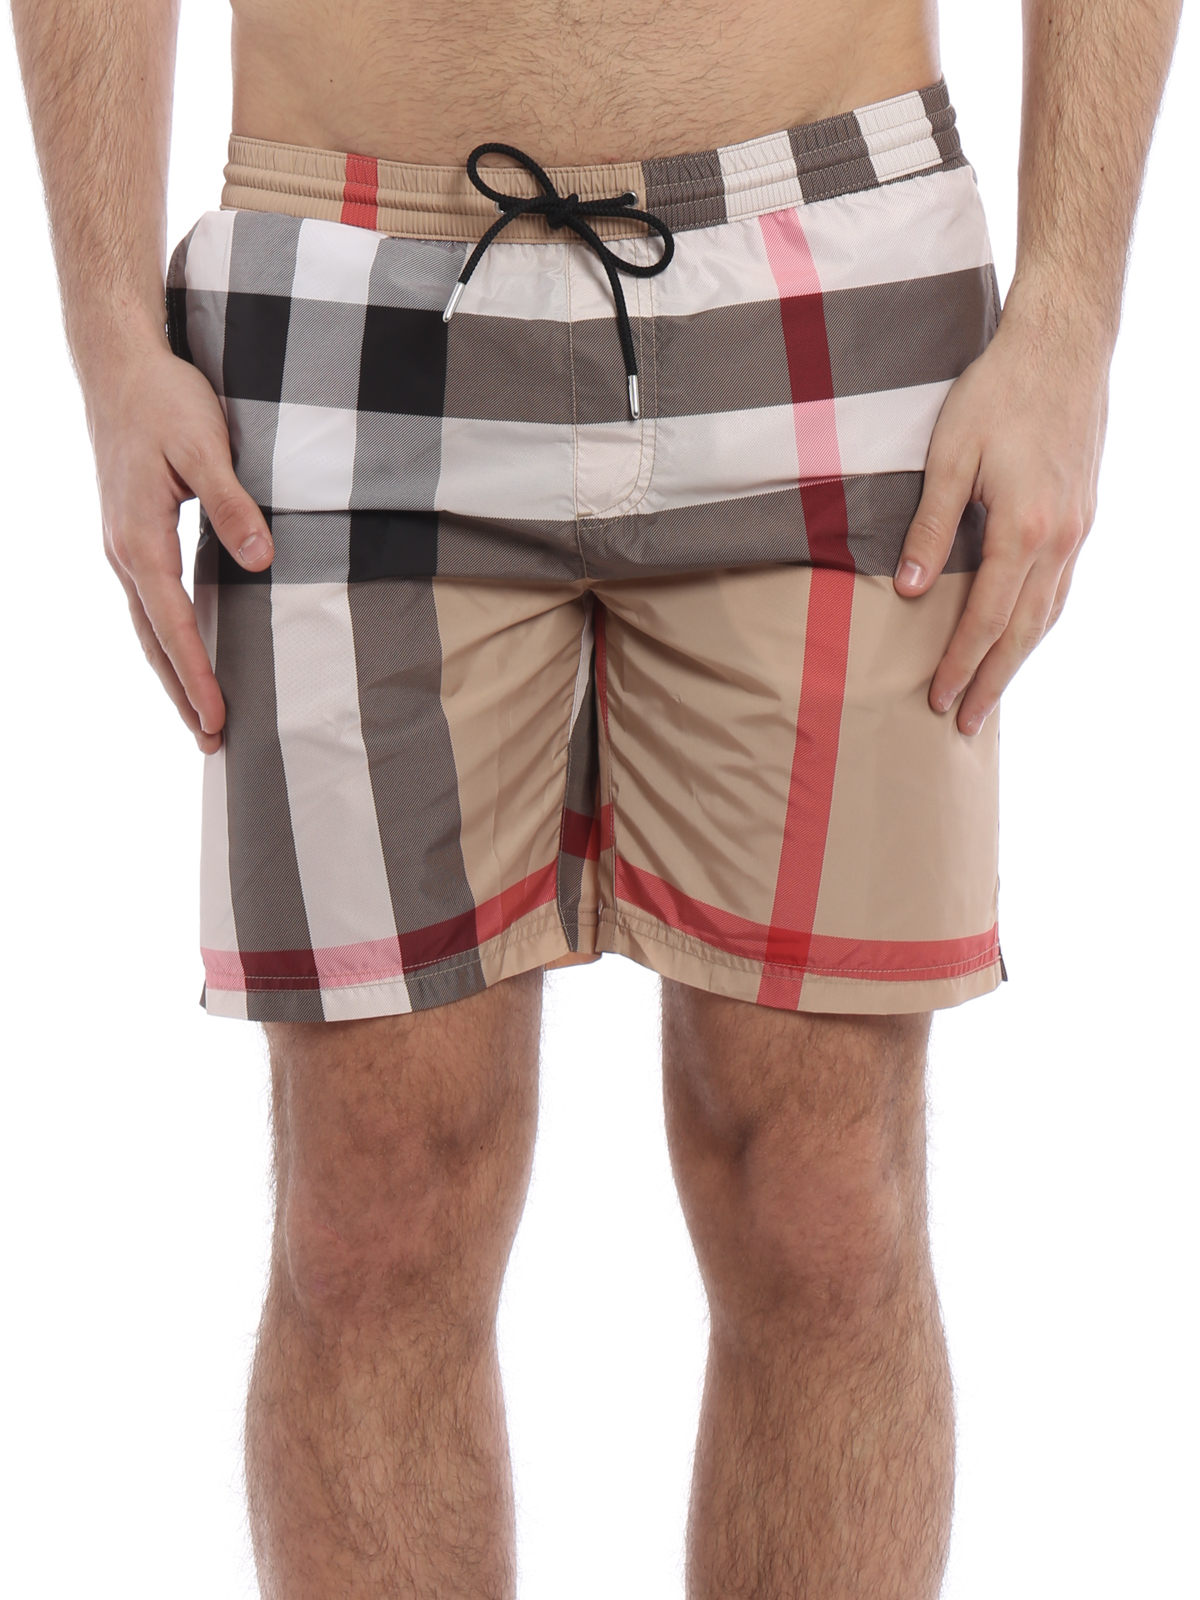 Burberry - Gowers swimming shorts 